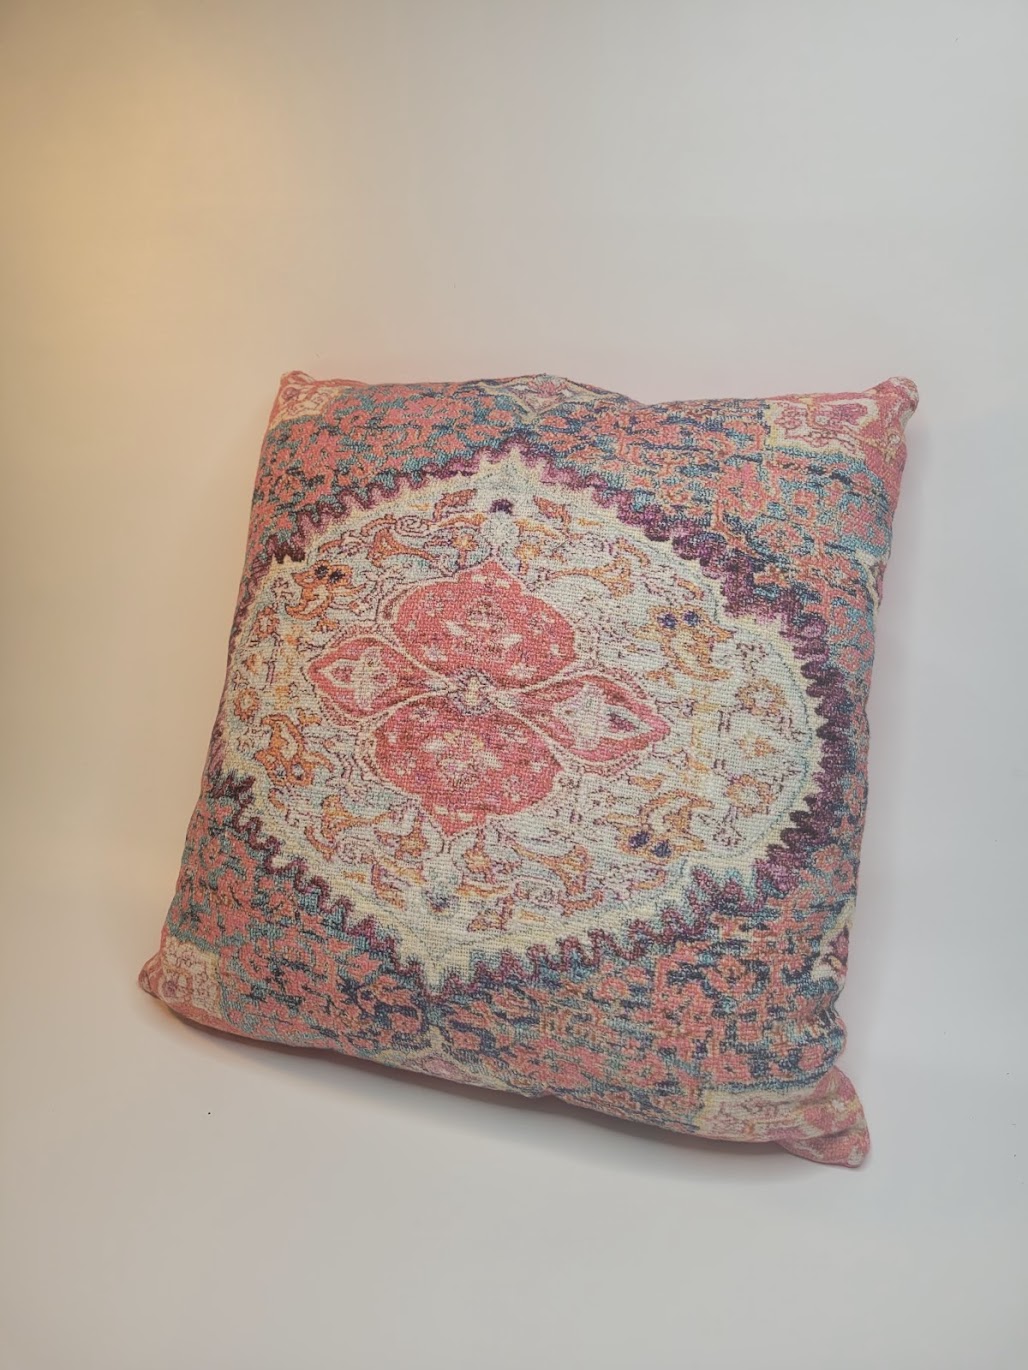 Vintage Inspired Throw Pillow